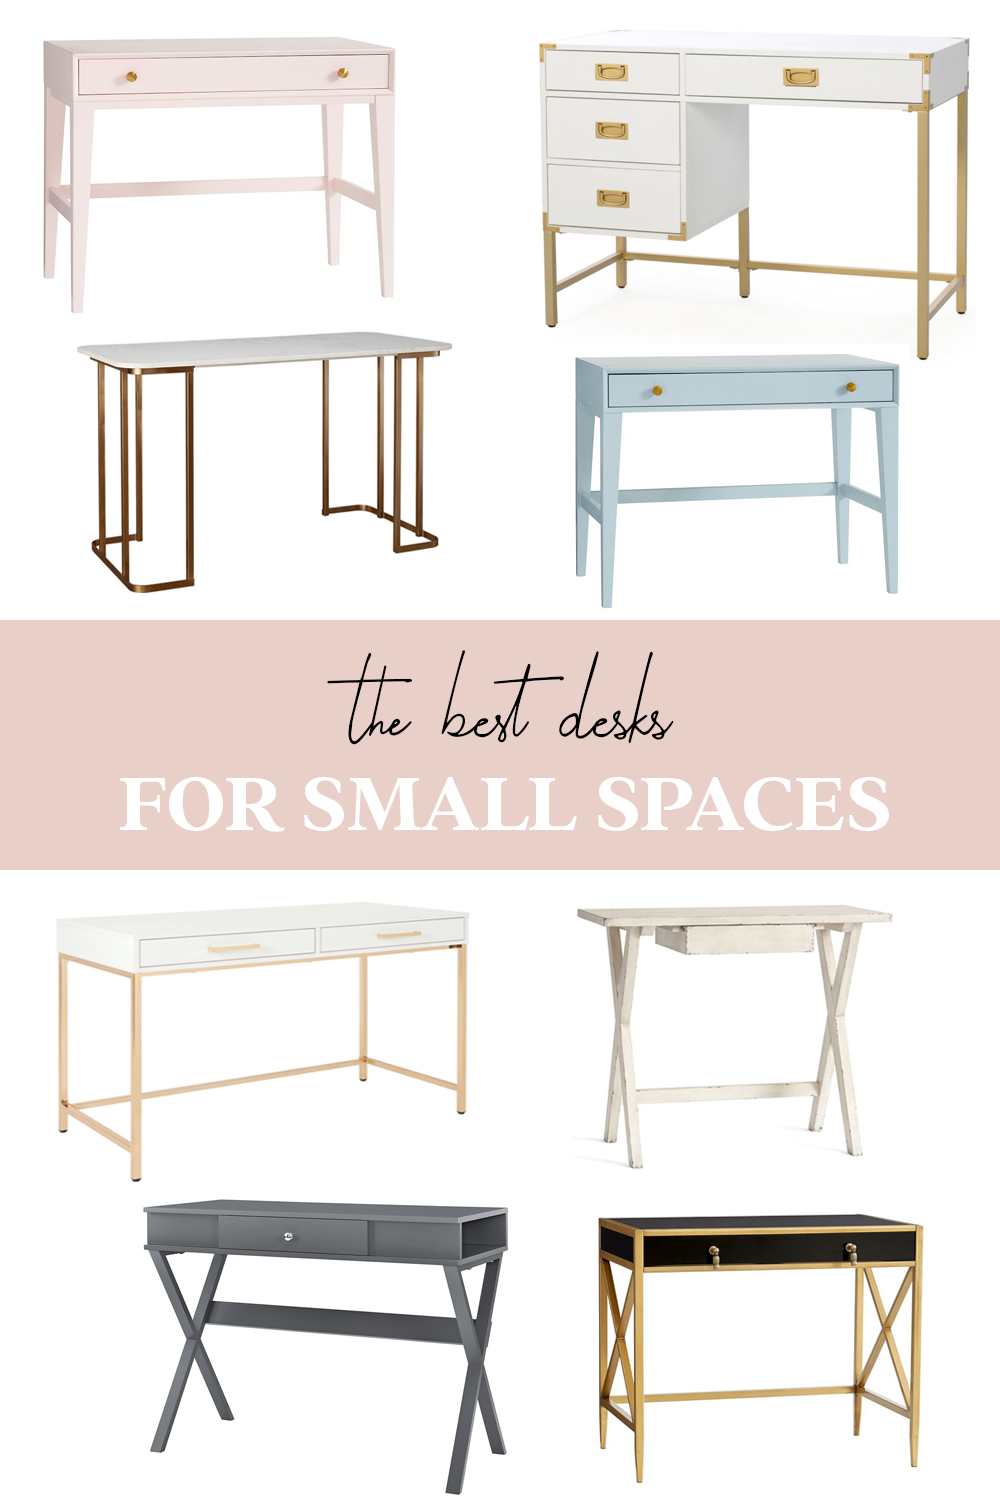 The Best Desks for Small Spaces – Money Can Buy Lipstick